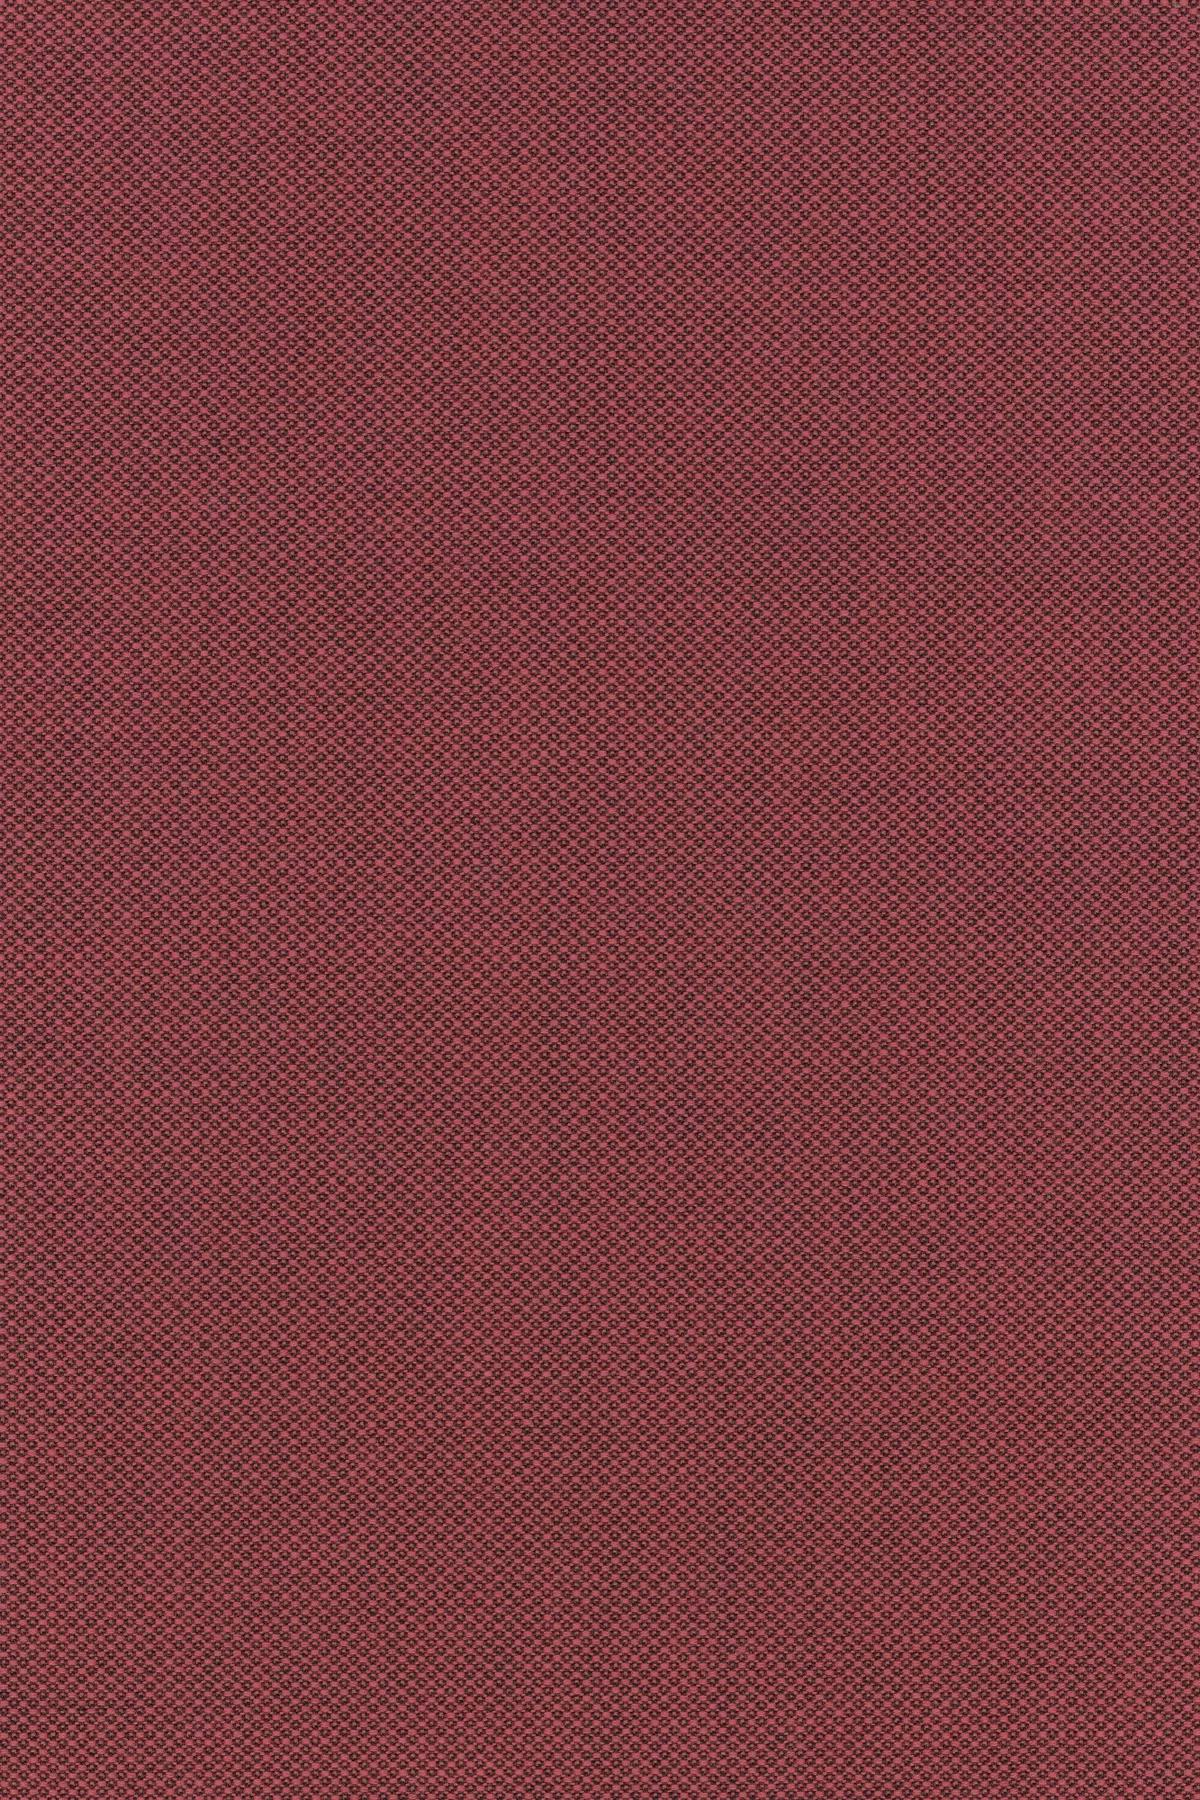 Fabric sample Fiord red